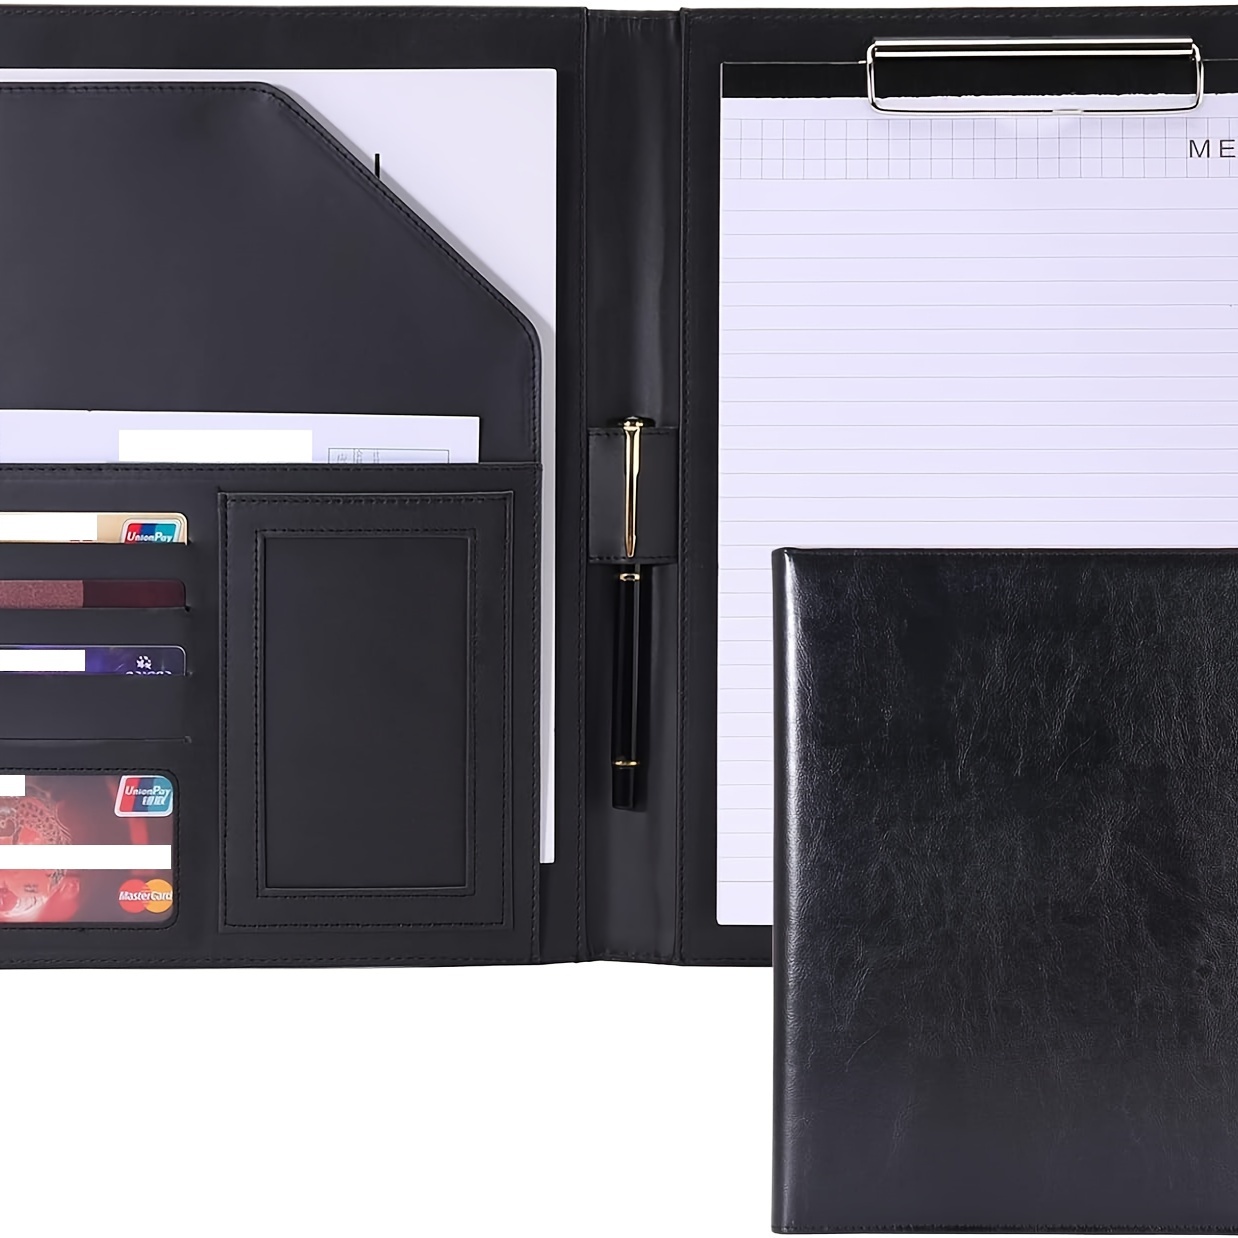 

Pu Leather Portfolio Clipboard Folder With Resume Interview Organizer, Business Card Holder Slot, Letter/a4 Size Paper Clip, Document/tablet Sleeve, Pen Loop, And Cellphone Pocket